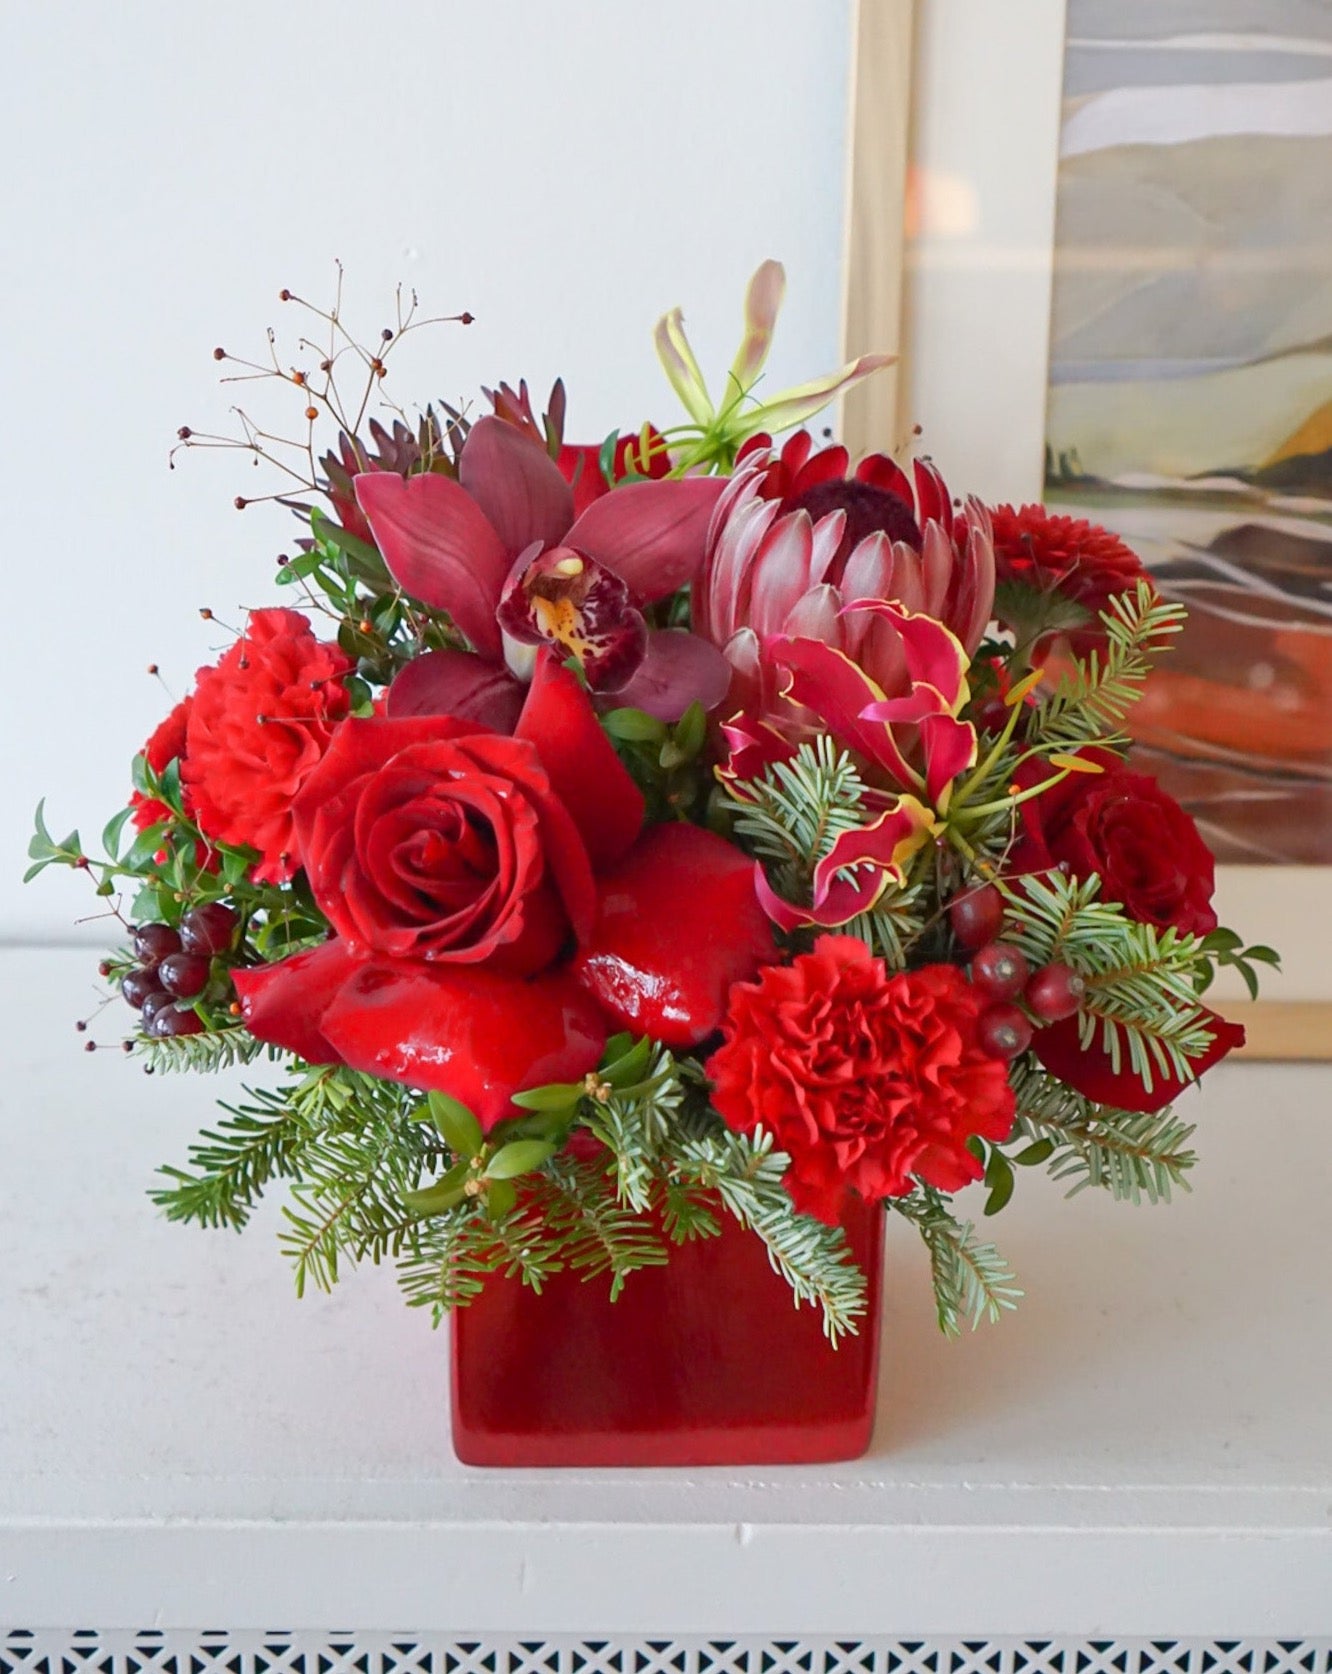 Bring your holiday table to life with this beautiful all red blooms flower arrangement. A charming display of protea, freedom roses, gloriosa, with a fragrant assortment of winter evergreen. Flower Nook, Toronto Florist